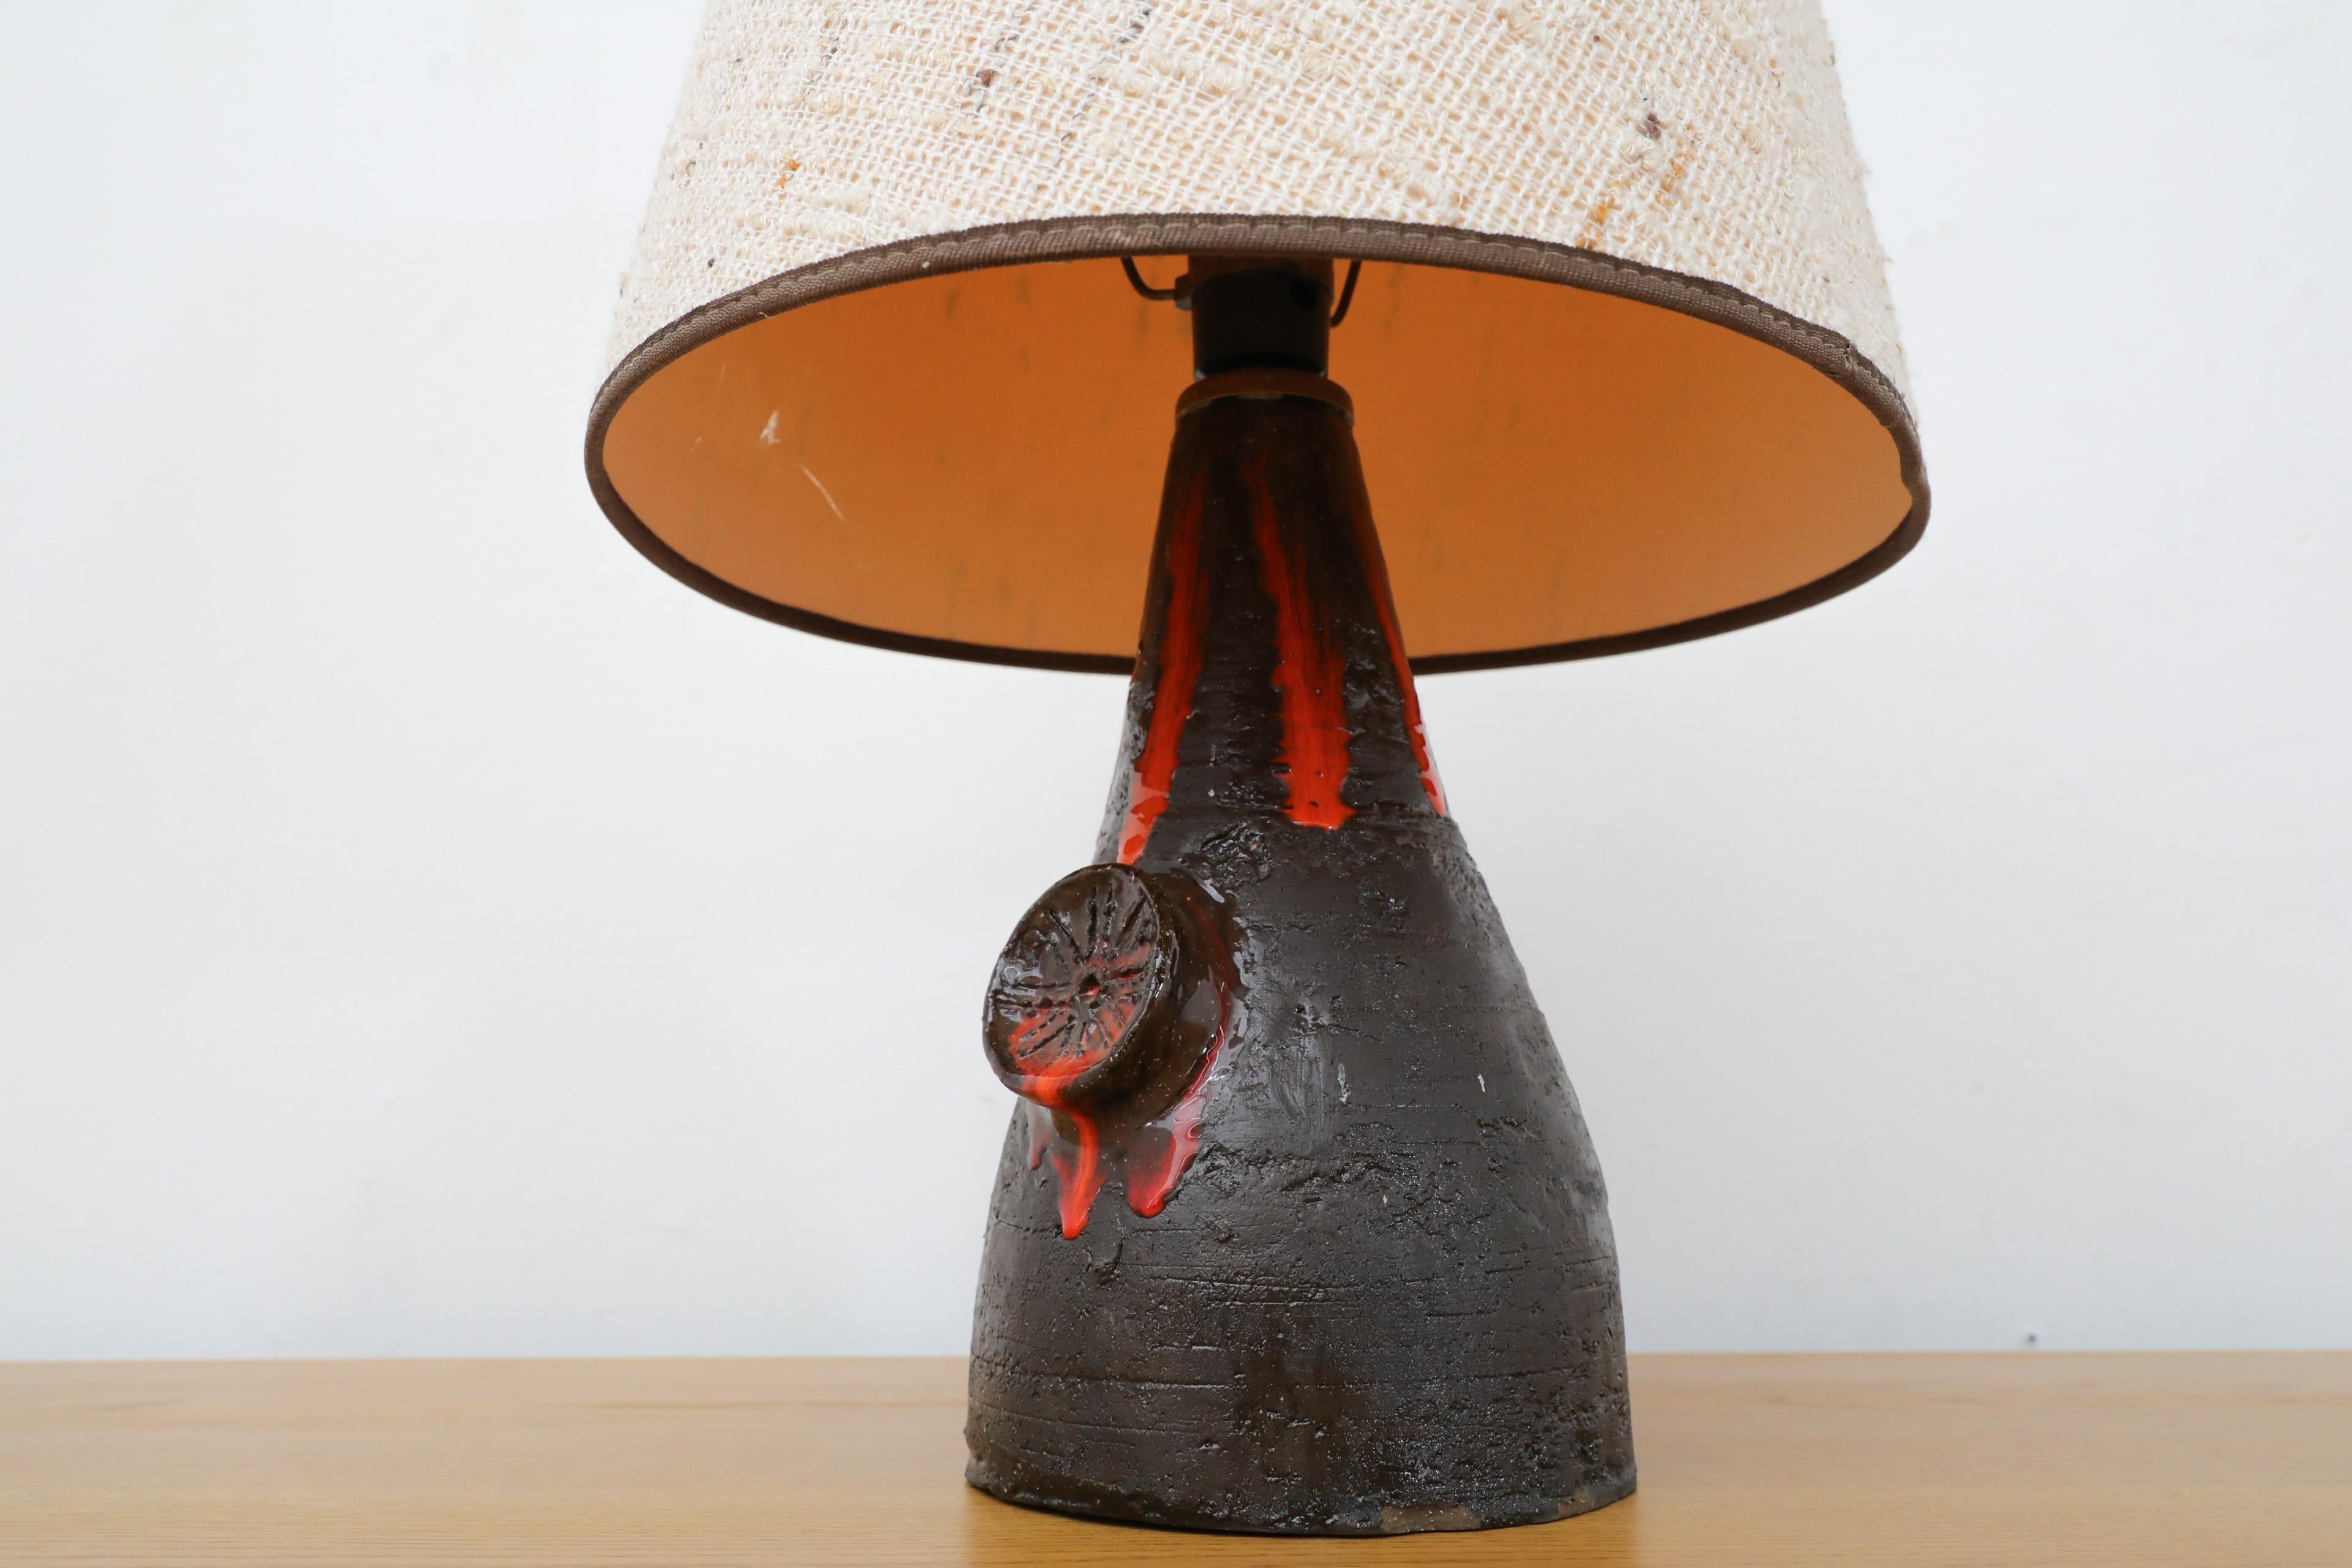 Dutch Mid-Century Black Ceramic Volcanic Table Lamp w/ Red Dripping Effect Glaze For Sale 4